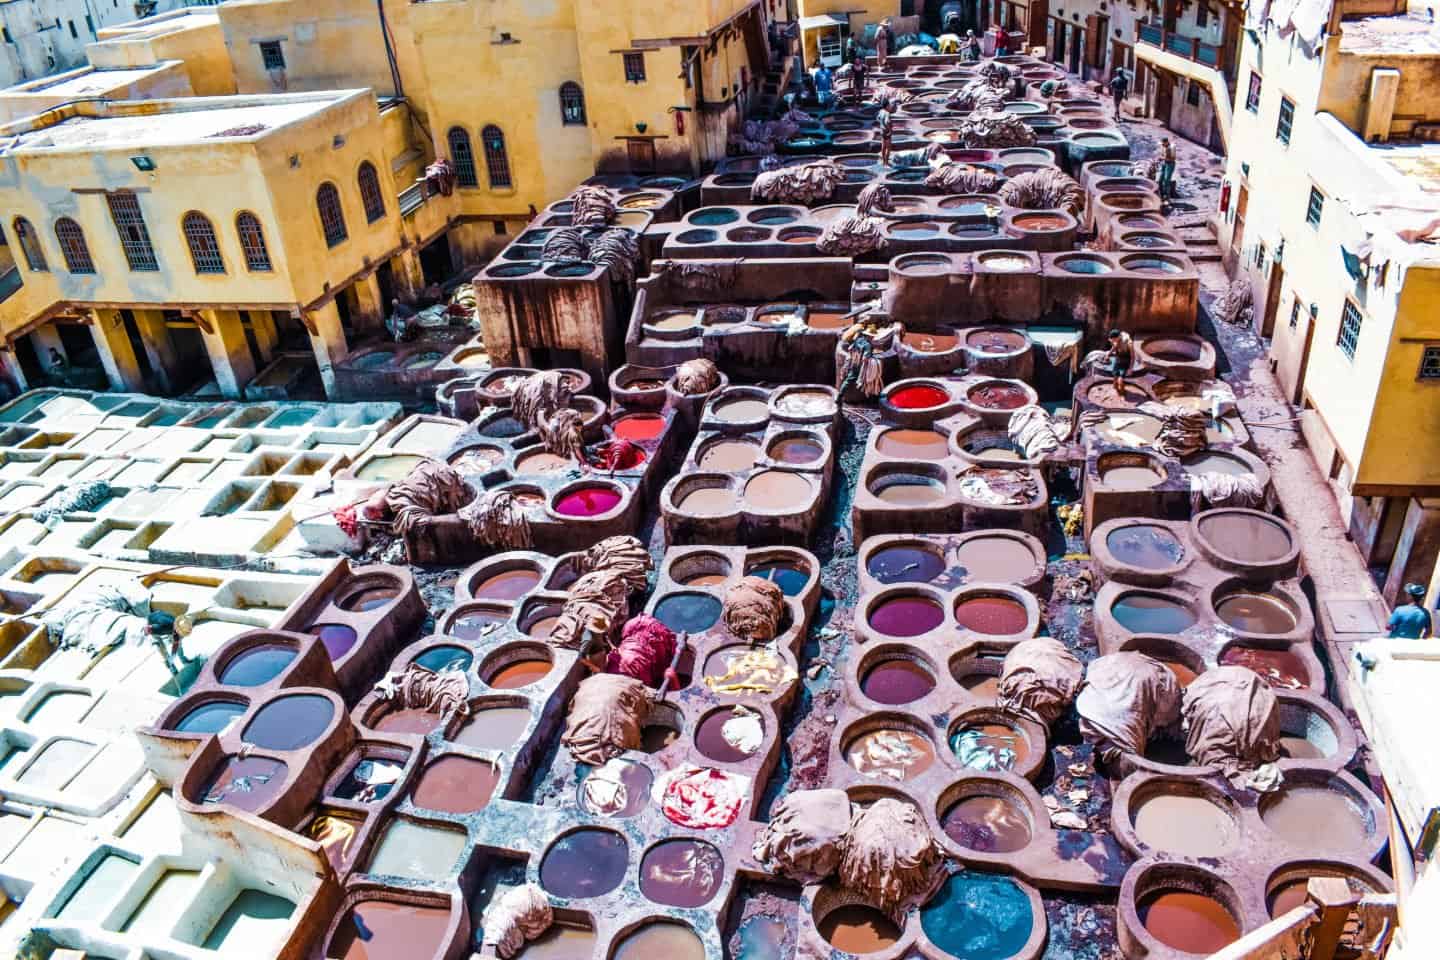 visiting tanneries in Fes